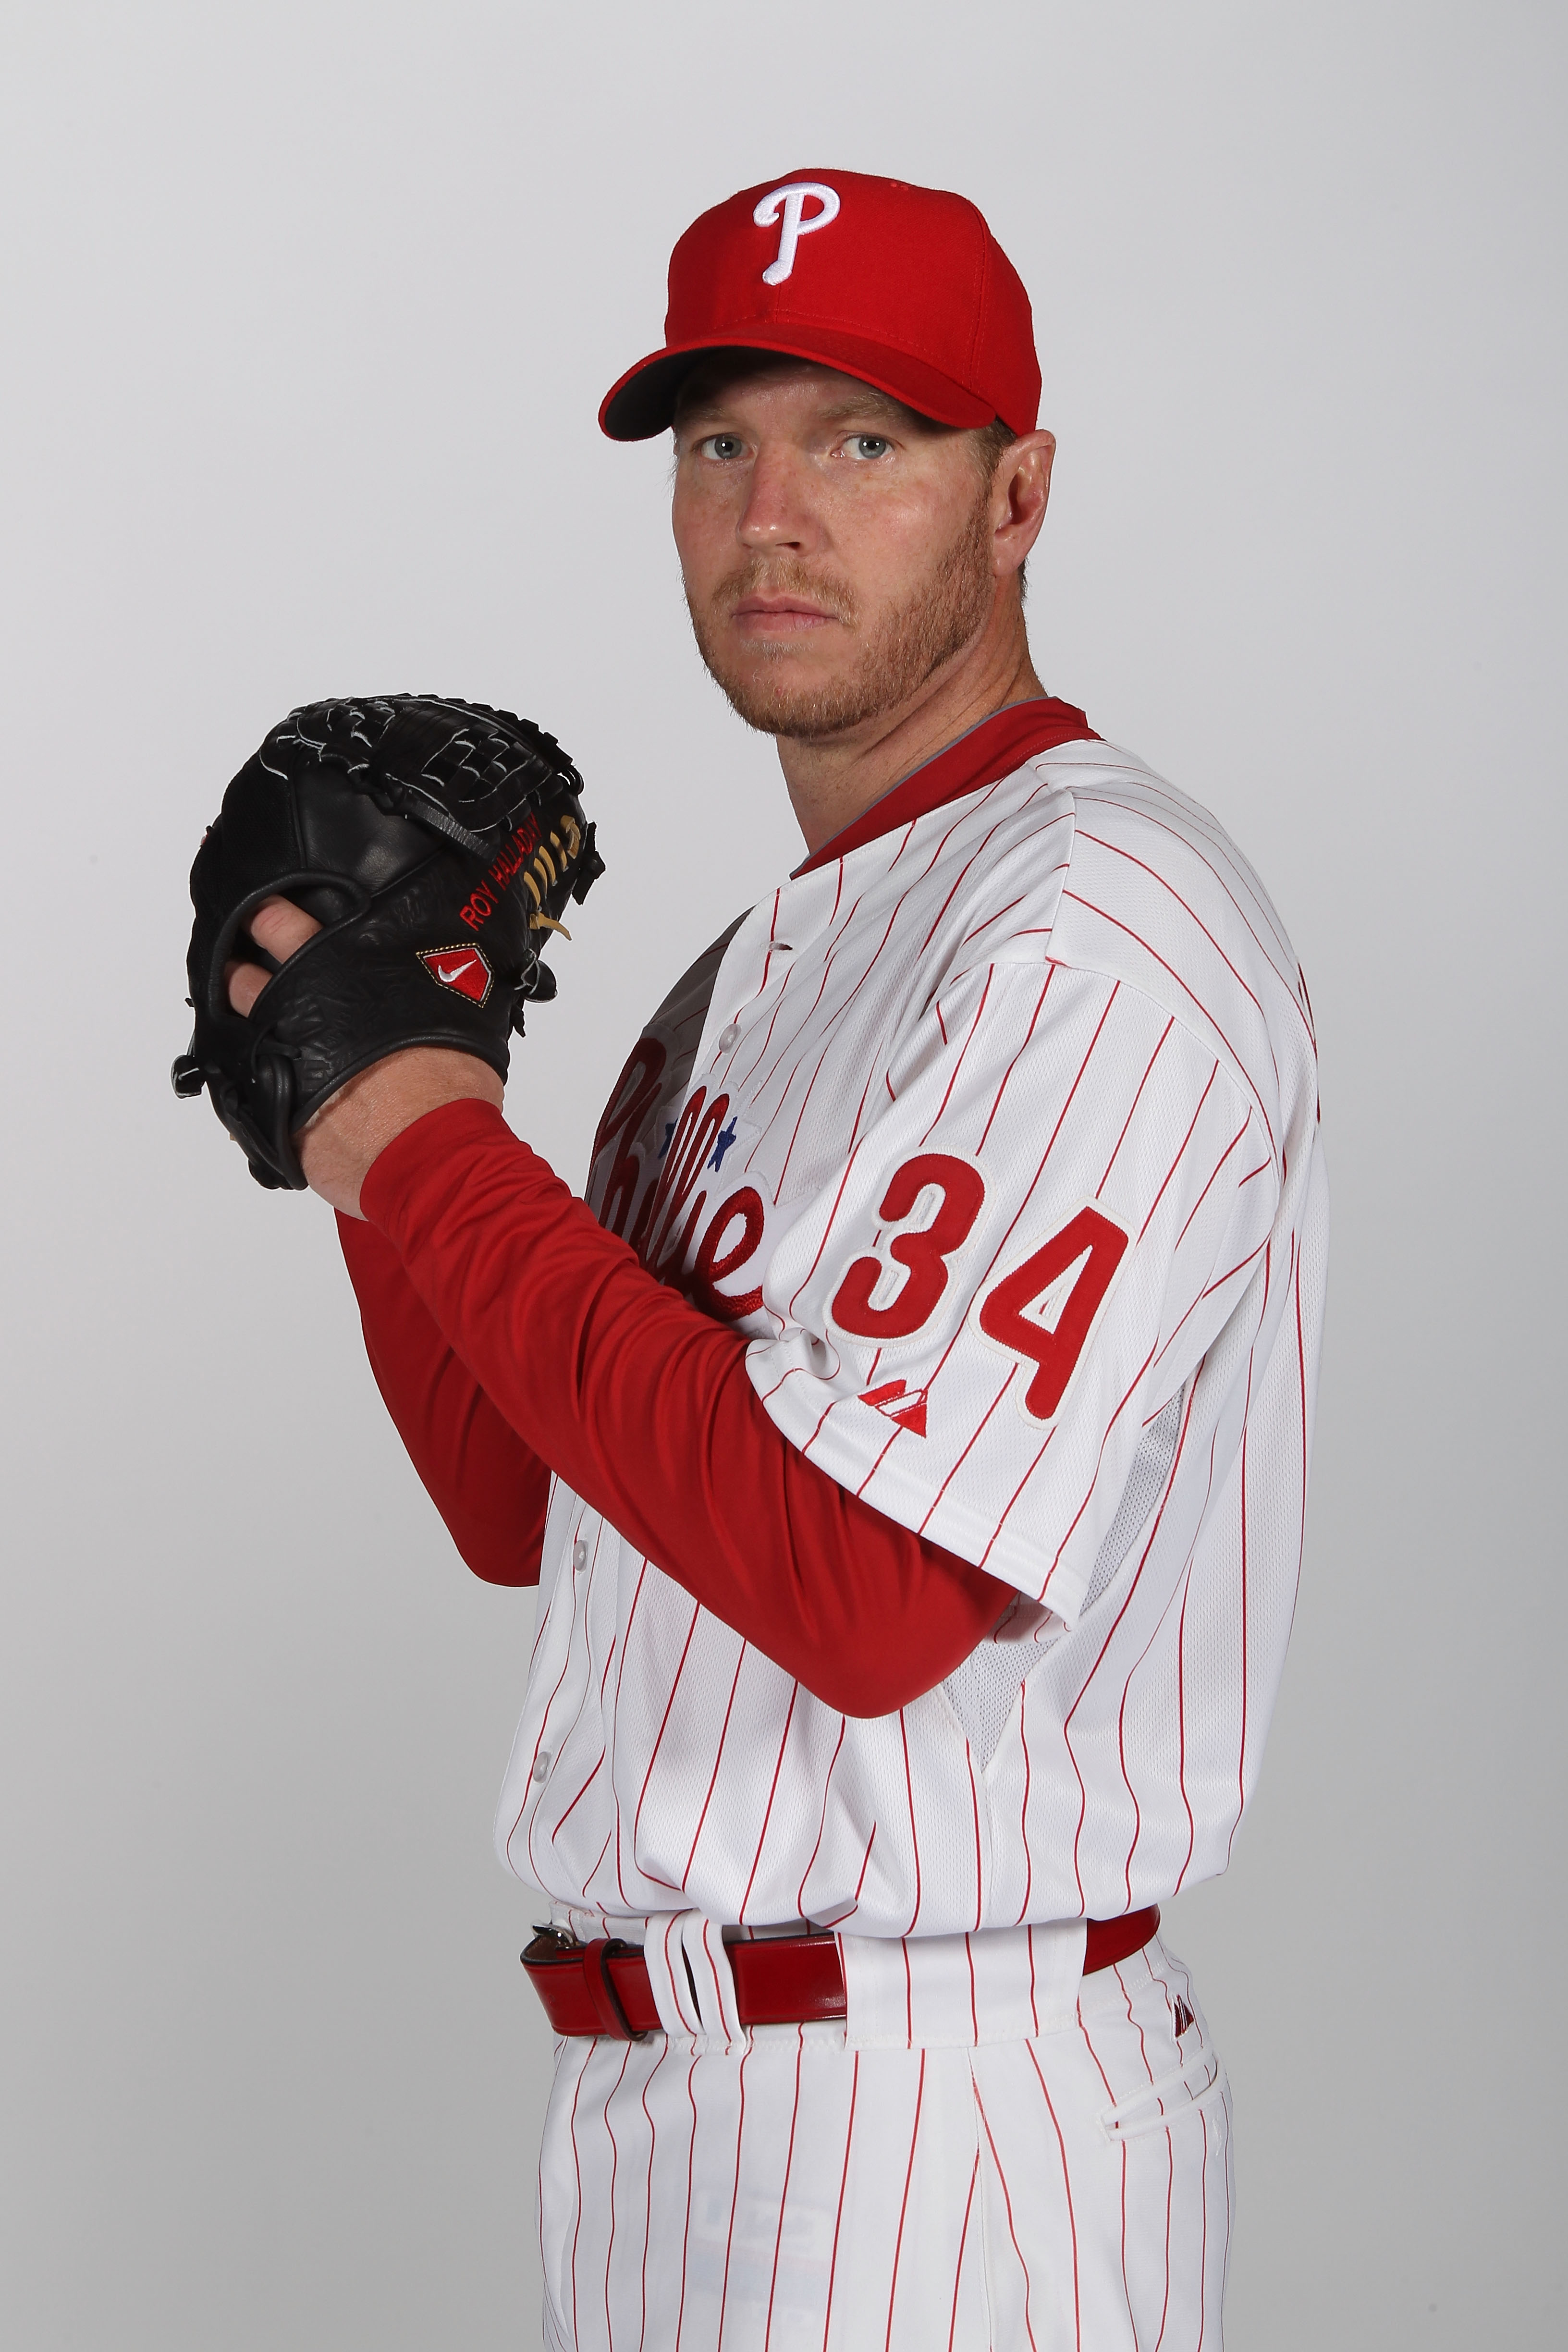 CLEARWATER, FL - FEBRUARY 22:  Roy Halladay #34 of the Philadelphia Phillies poses for a photo during Spring Training Media Photo Day at Bright House Networks Field on February 22, 2011 in Clearwater, Florida.  (Photo by Nick Laham/Getty Images)